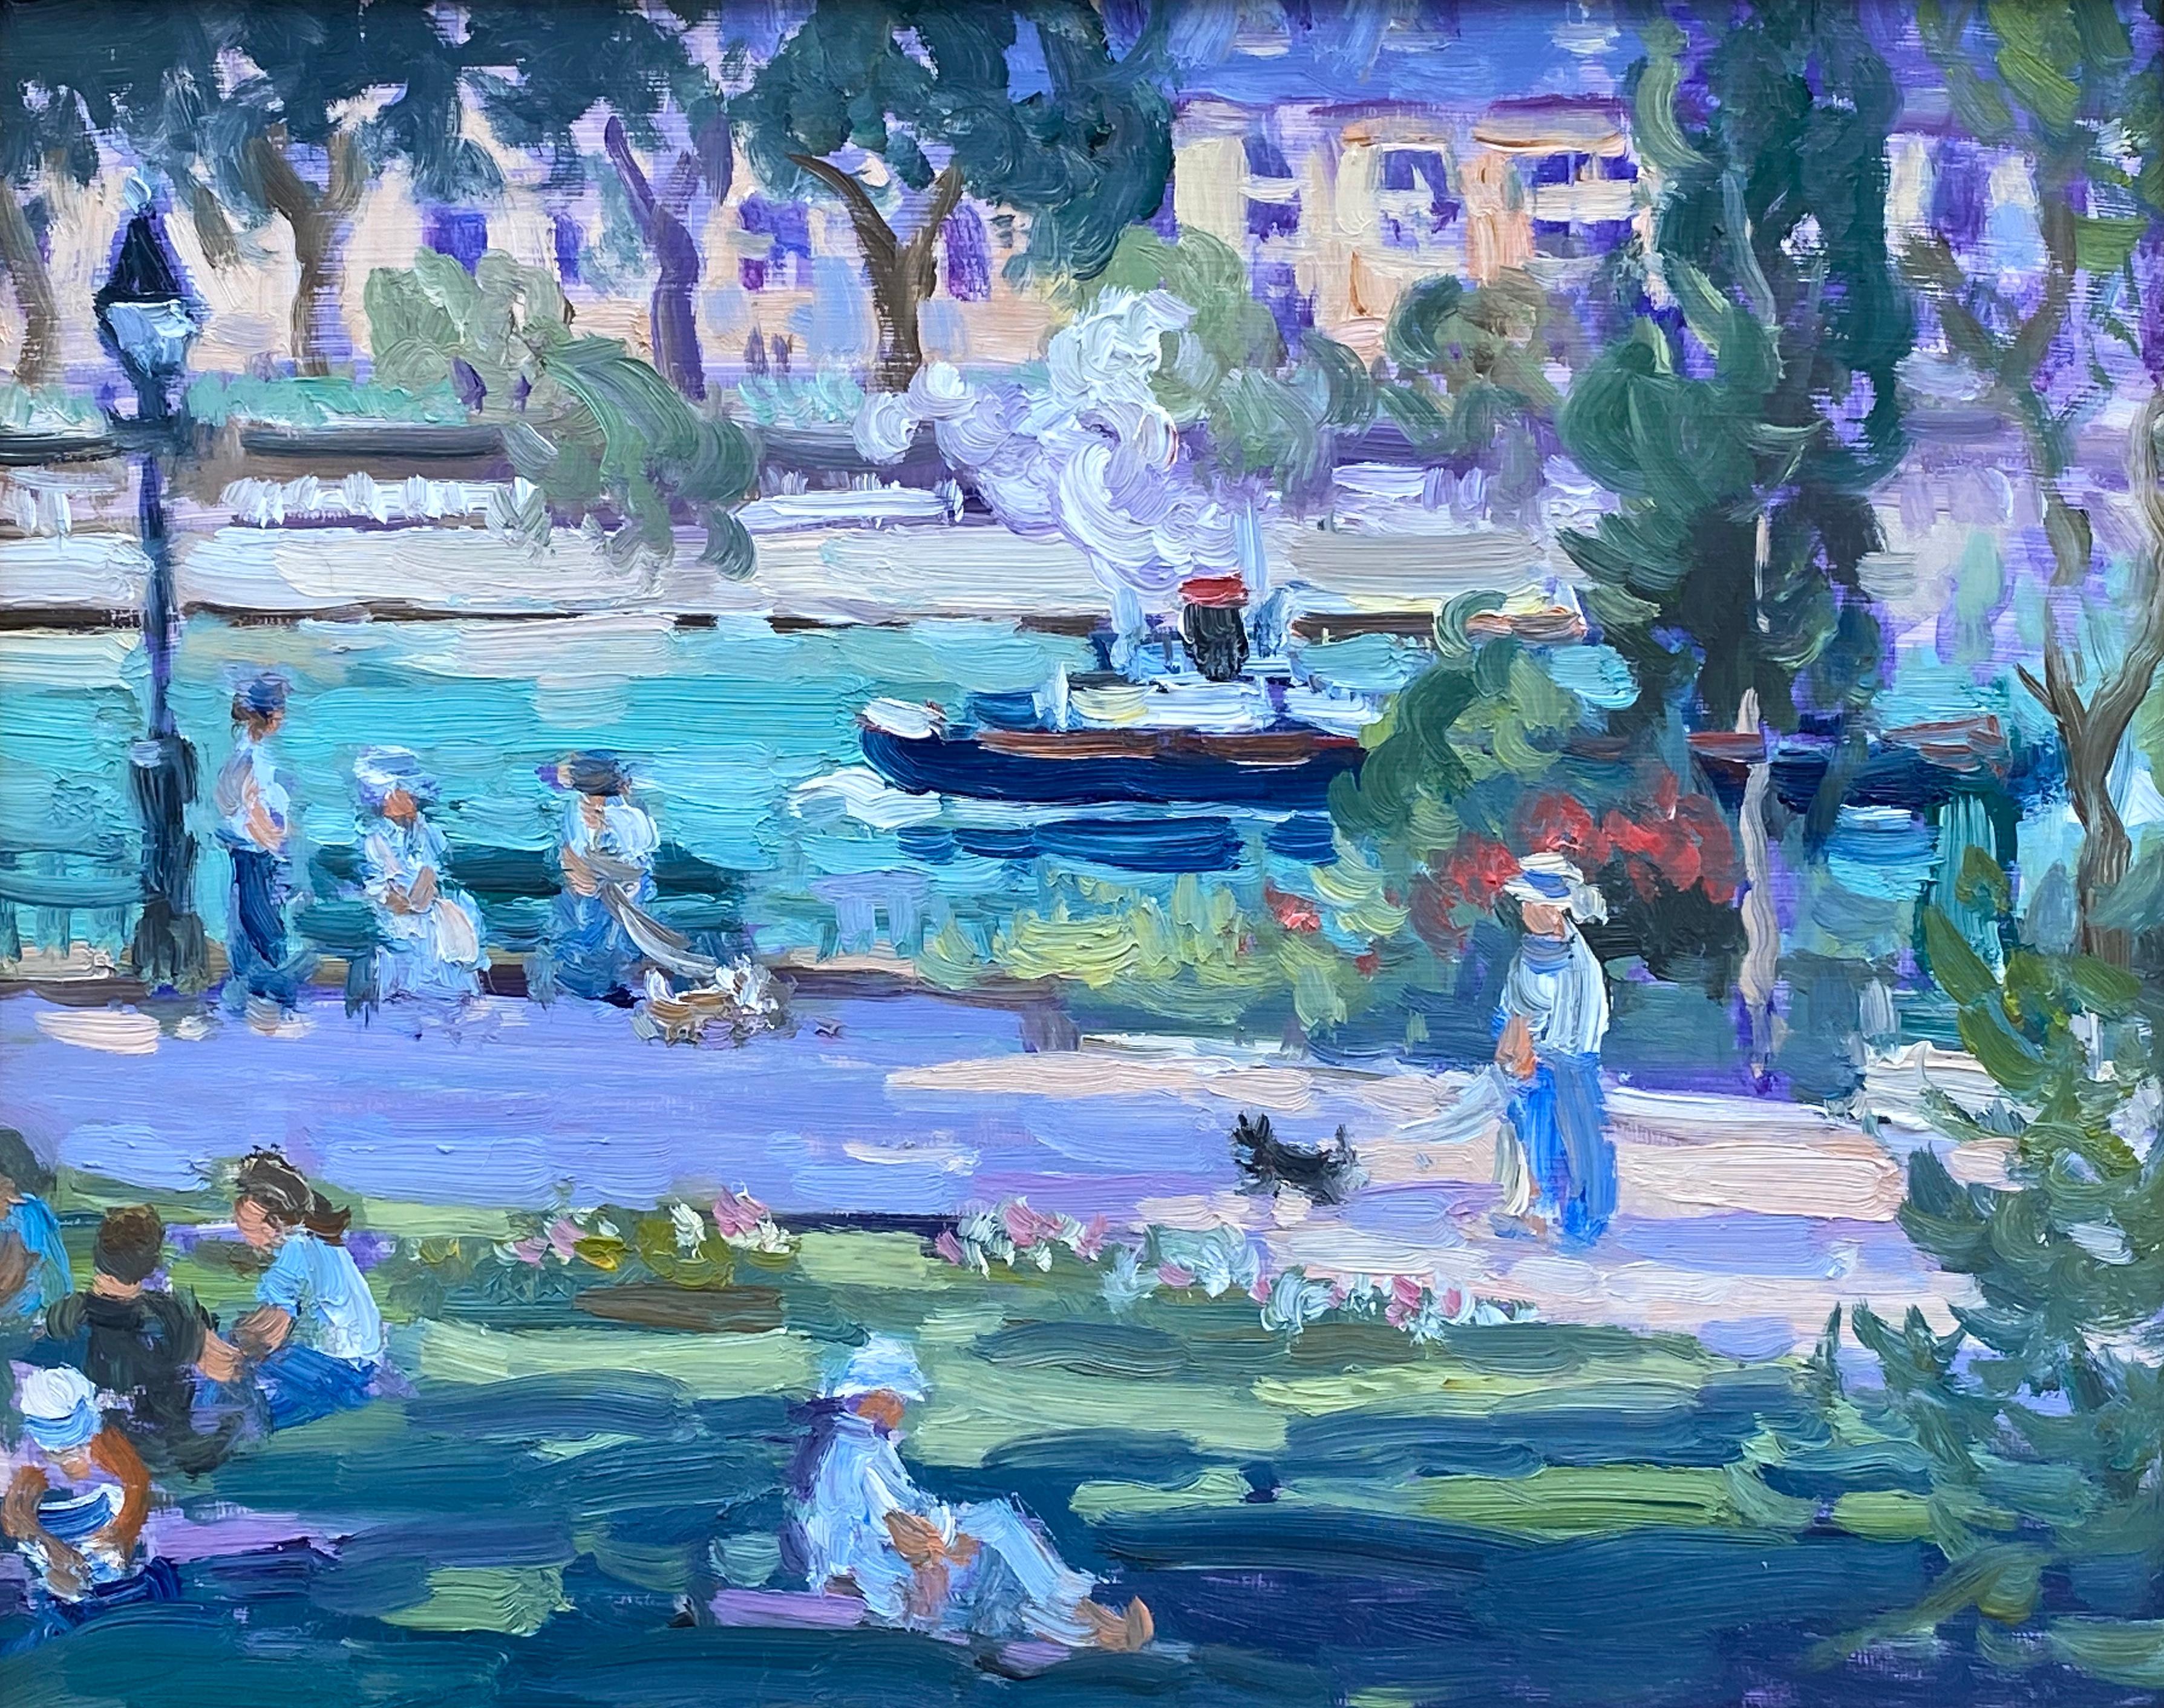 “Square  du Vert-Galant, Paris” - Post-Impressionist Painting by Keith Oehmig